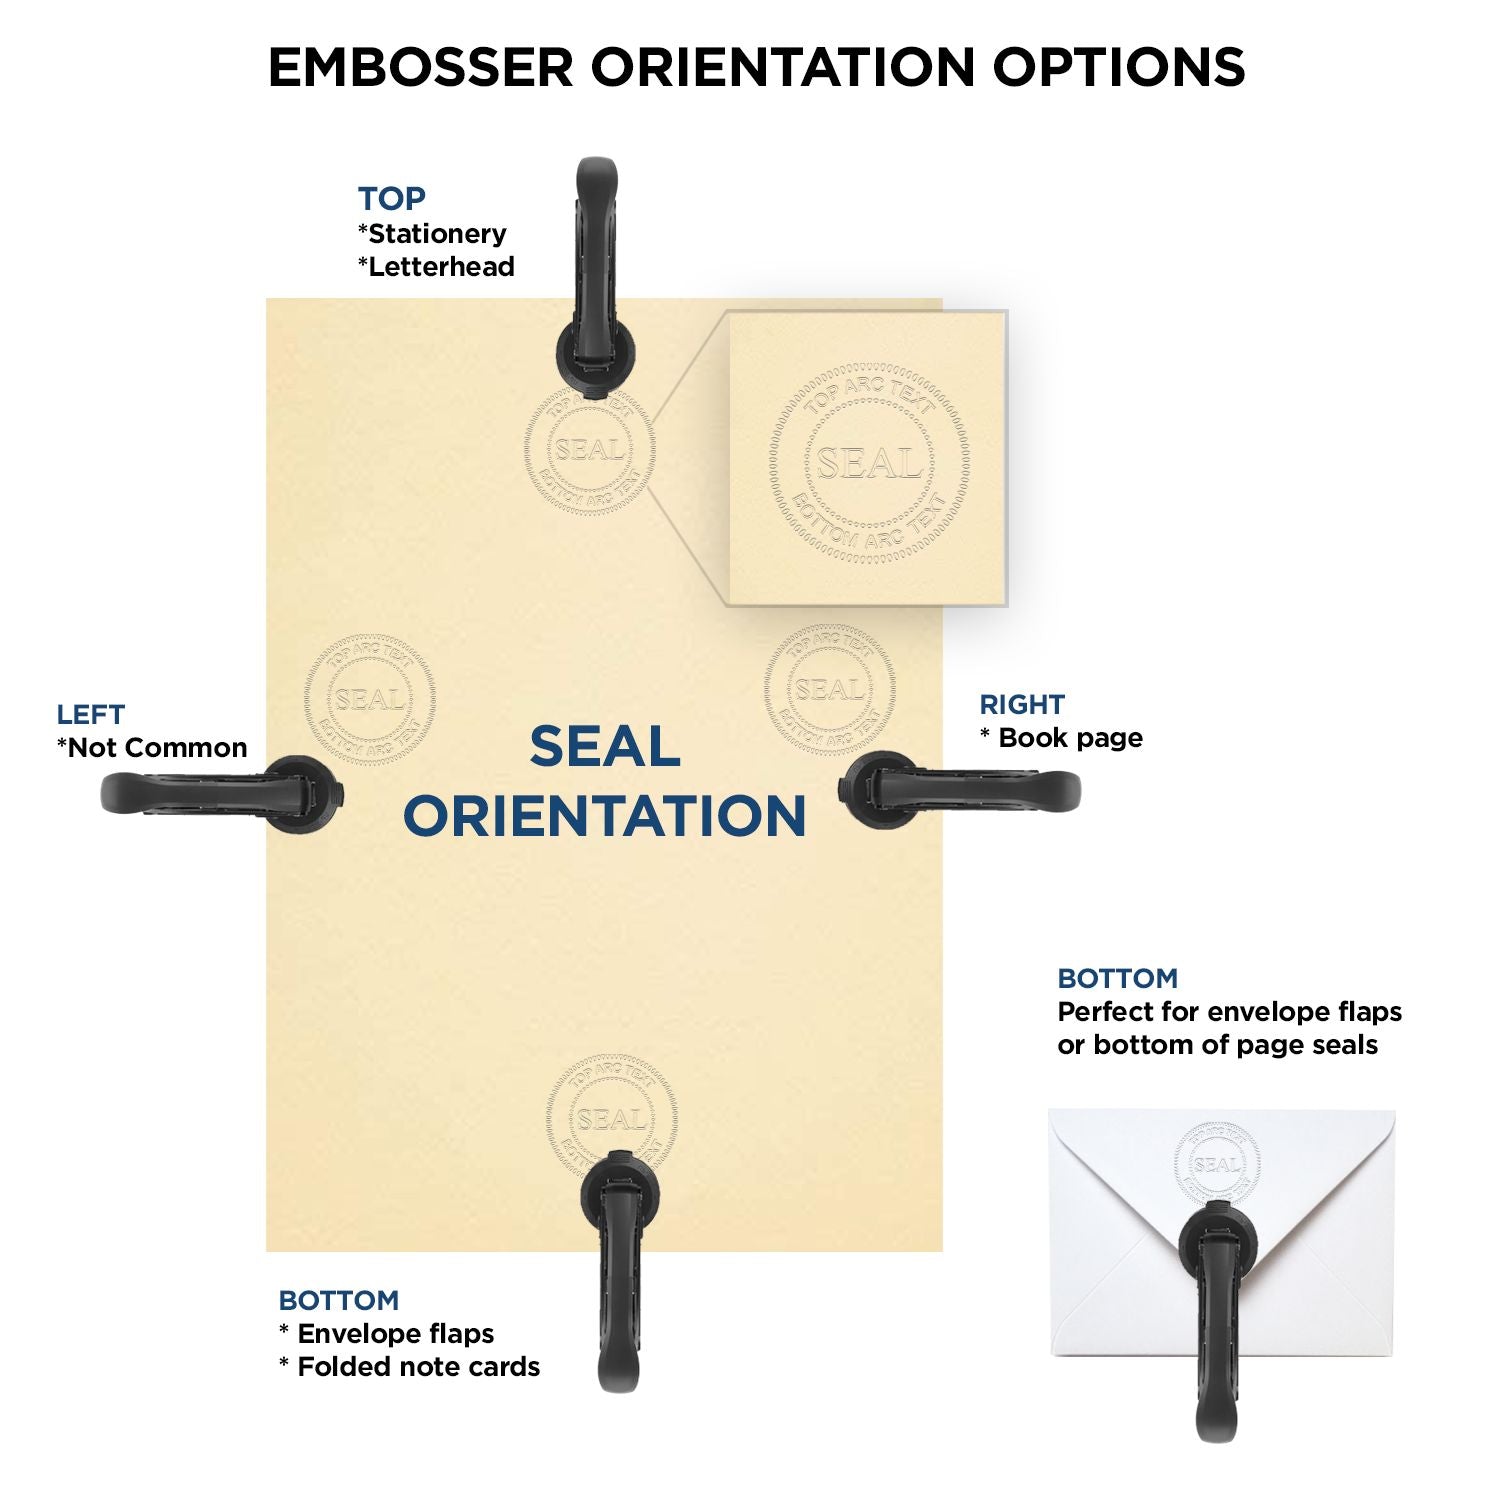 An infographic for the Handheld Virginia Land Surveyor Seal showing embosser orientation, this is showing examples of a top, bottom, right and left insert.